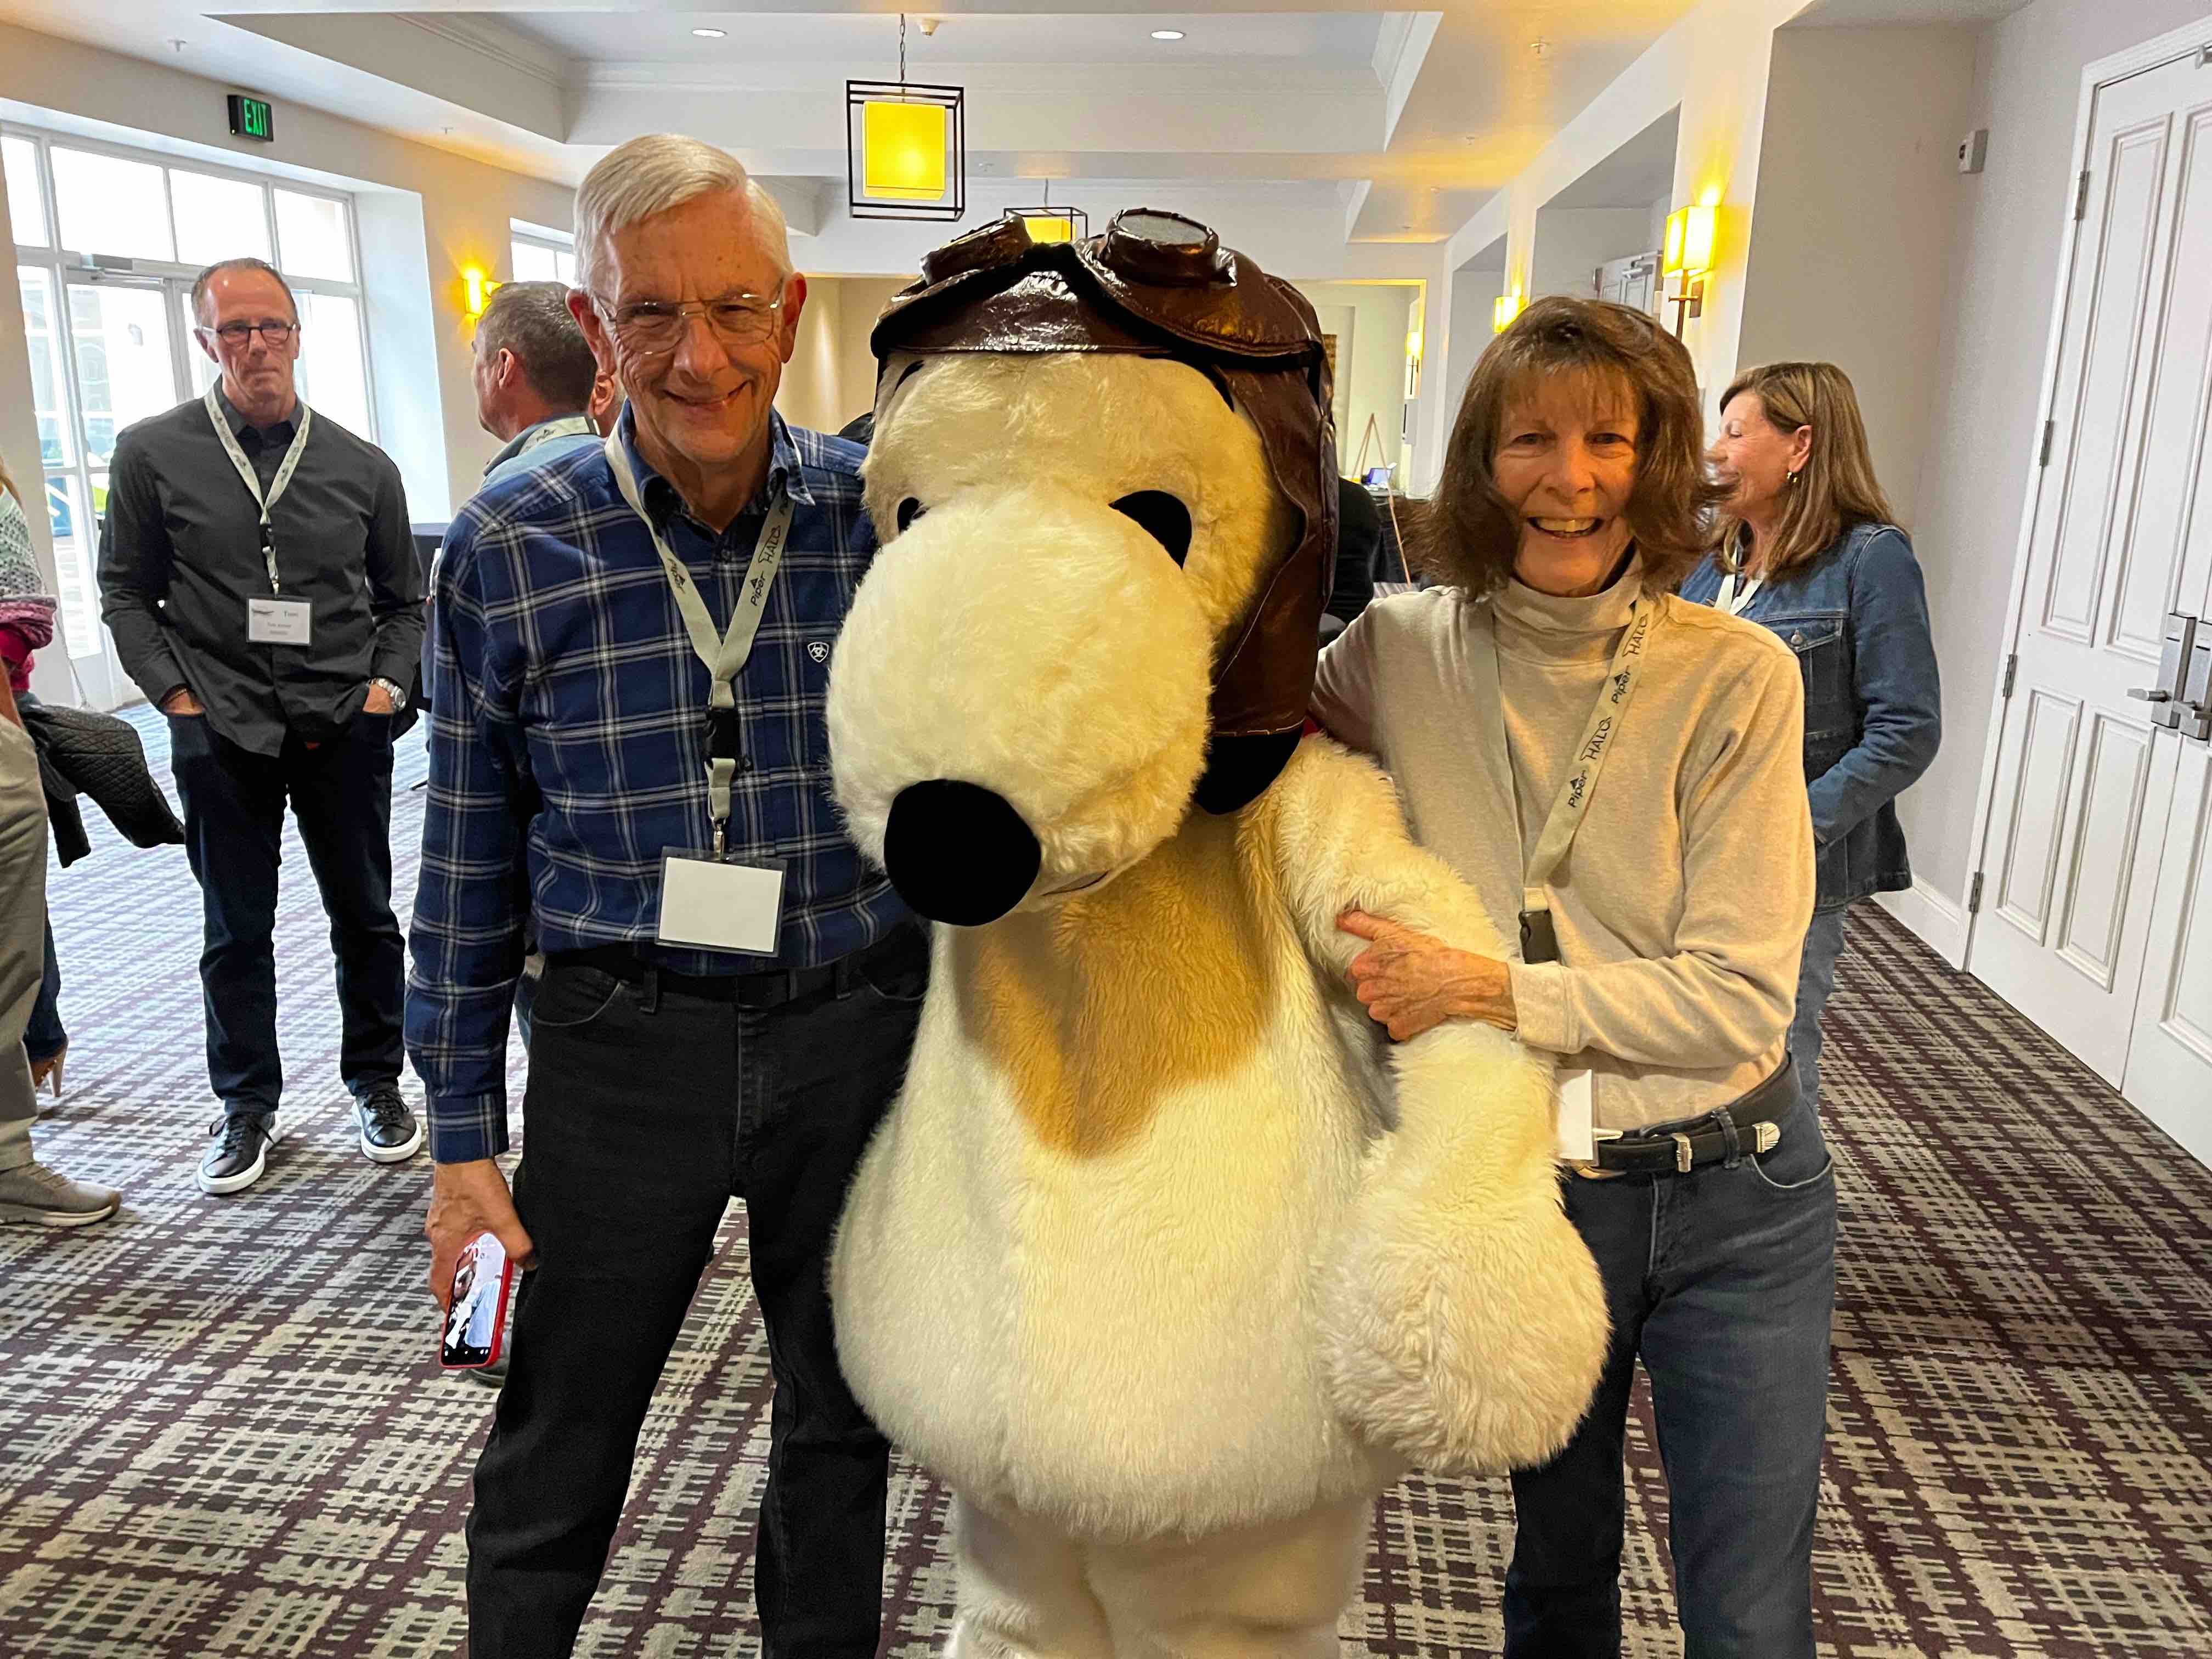 David and Susan with Snoopy